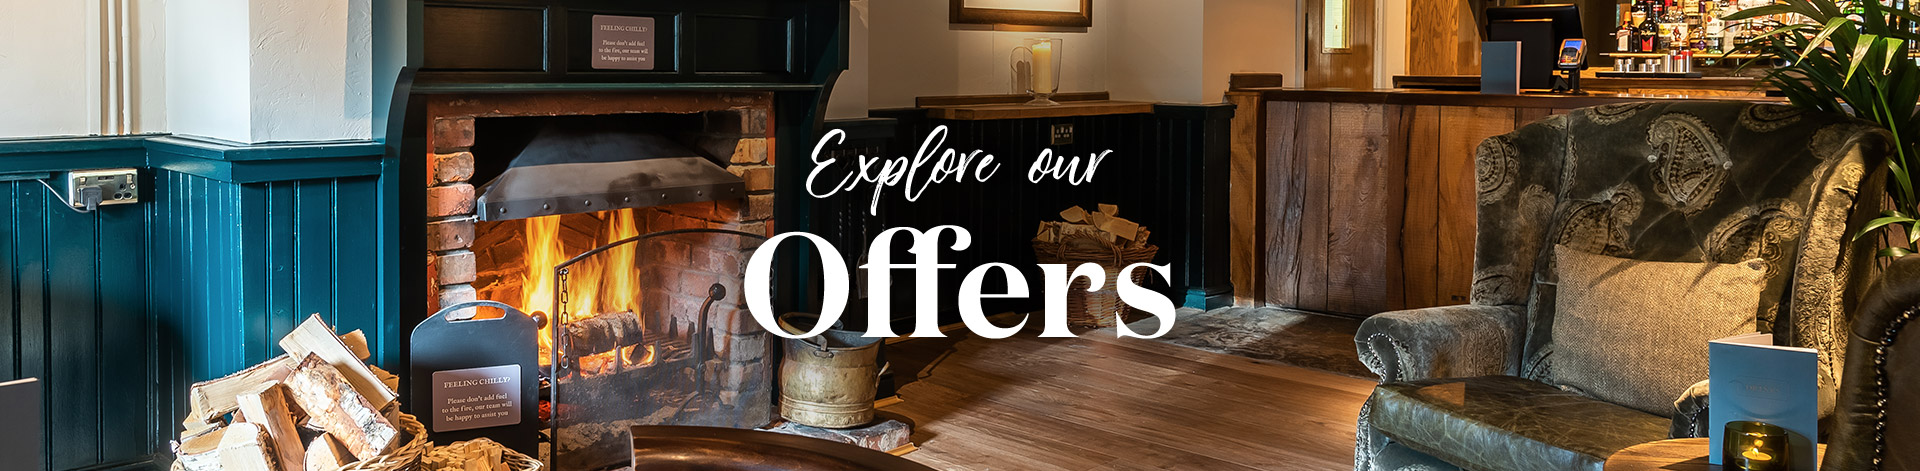 Our latest offers at The Fox and Raven